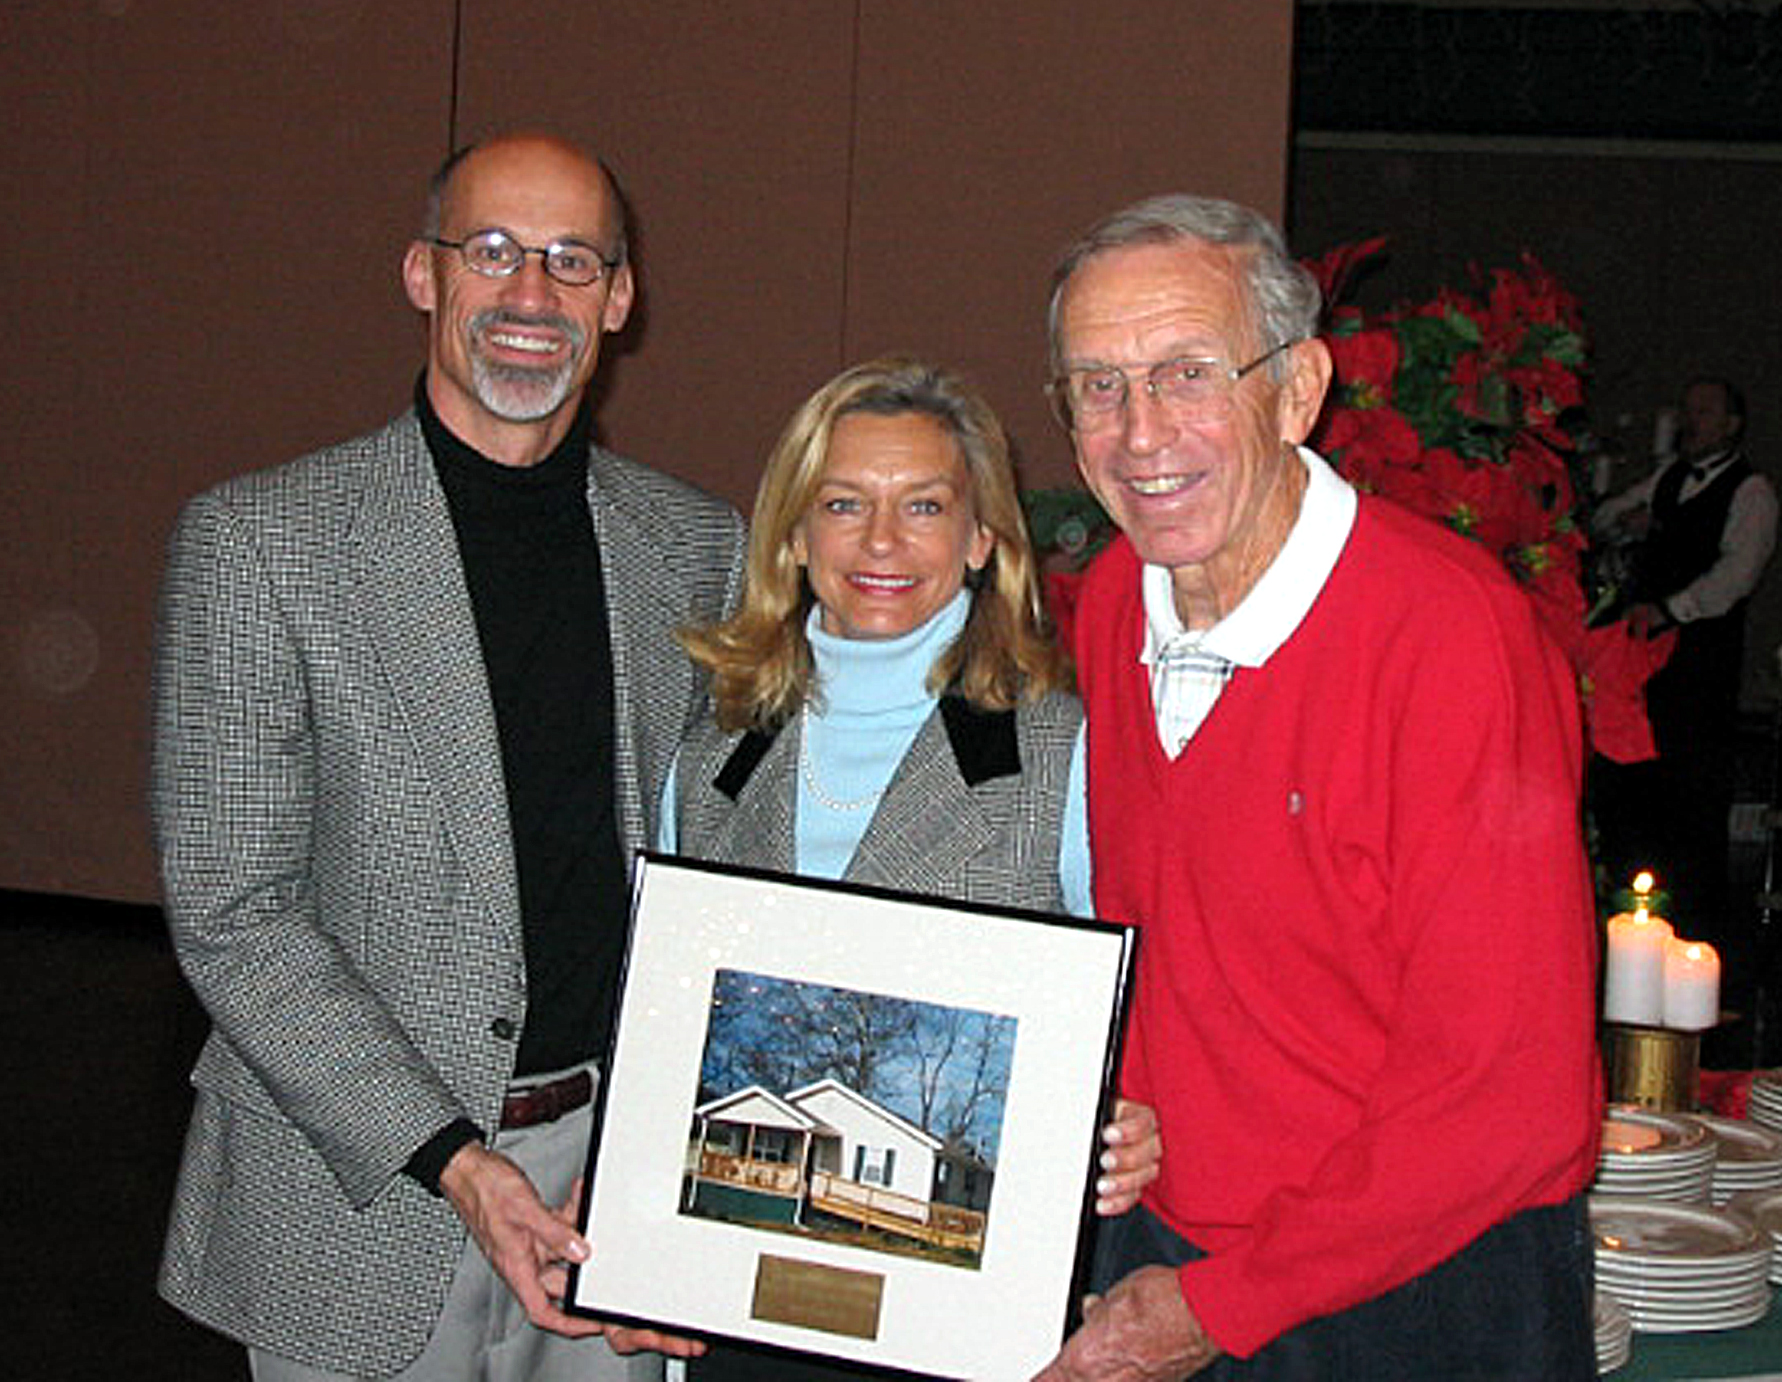 Bob Temple posing with a photo of a home that he helped build